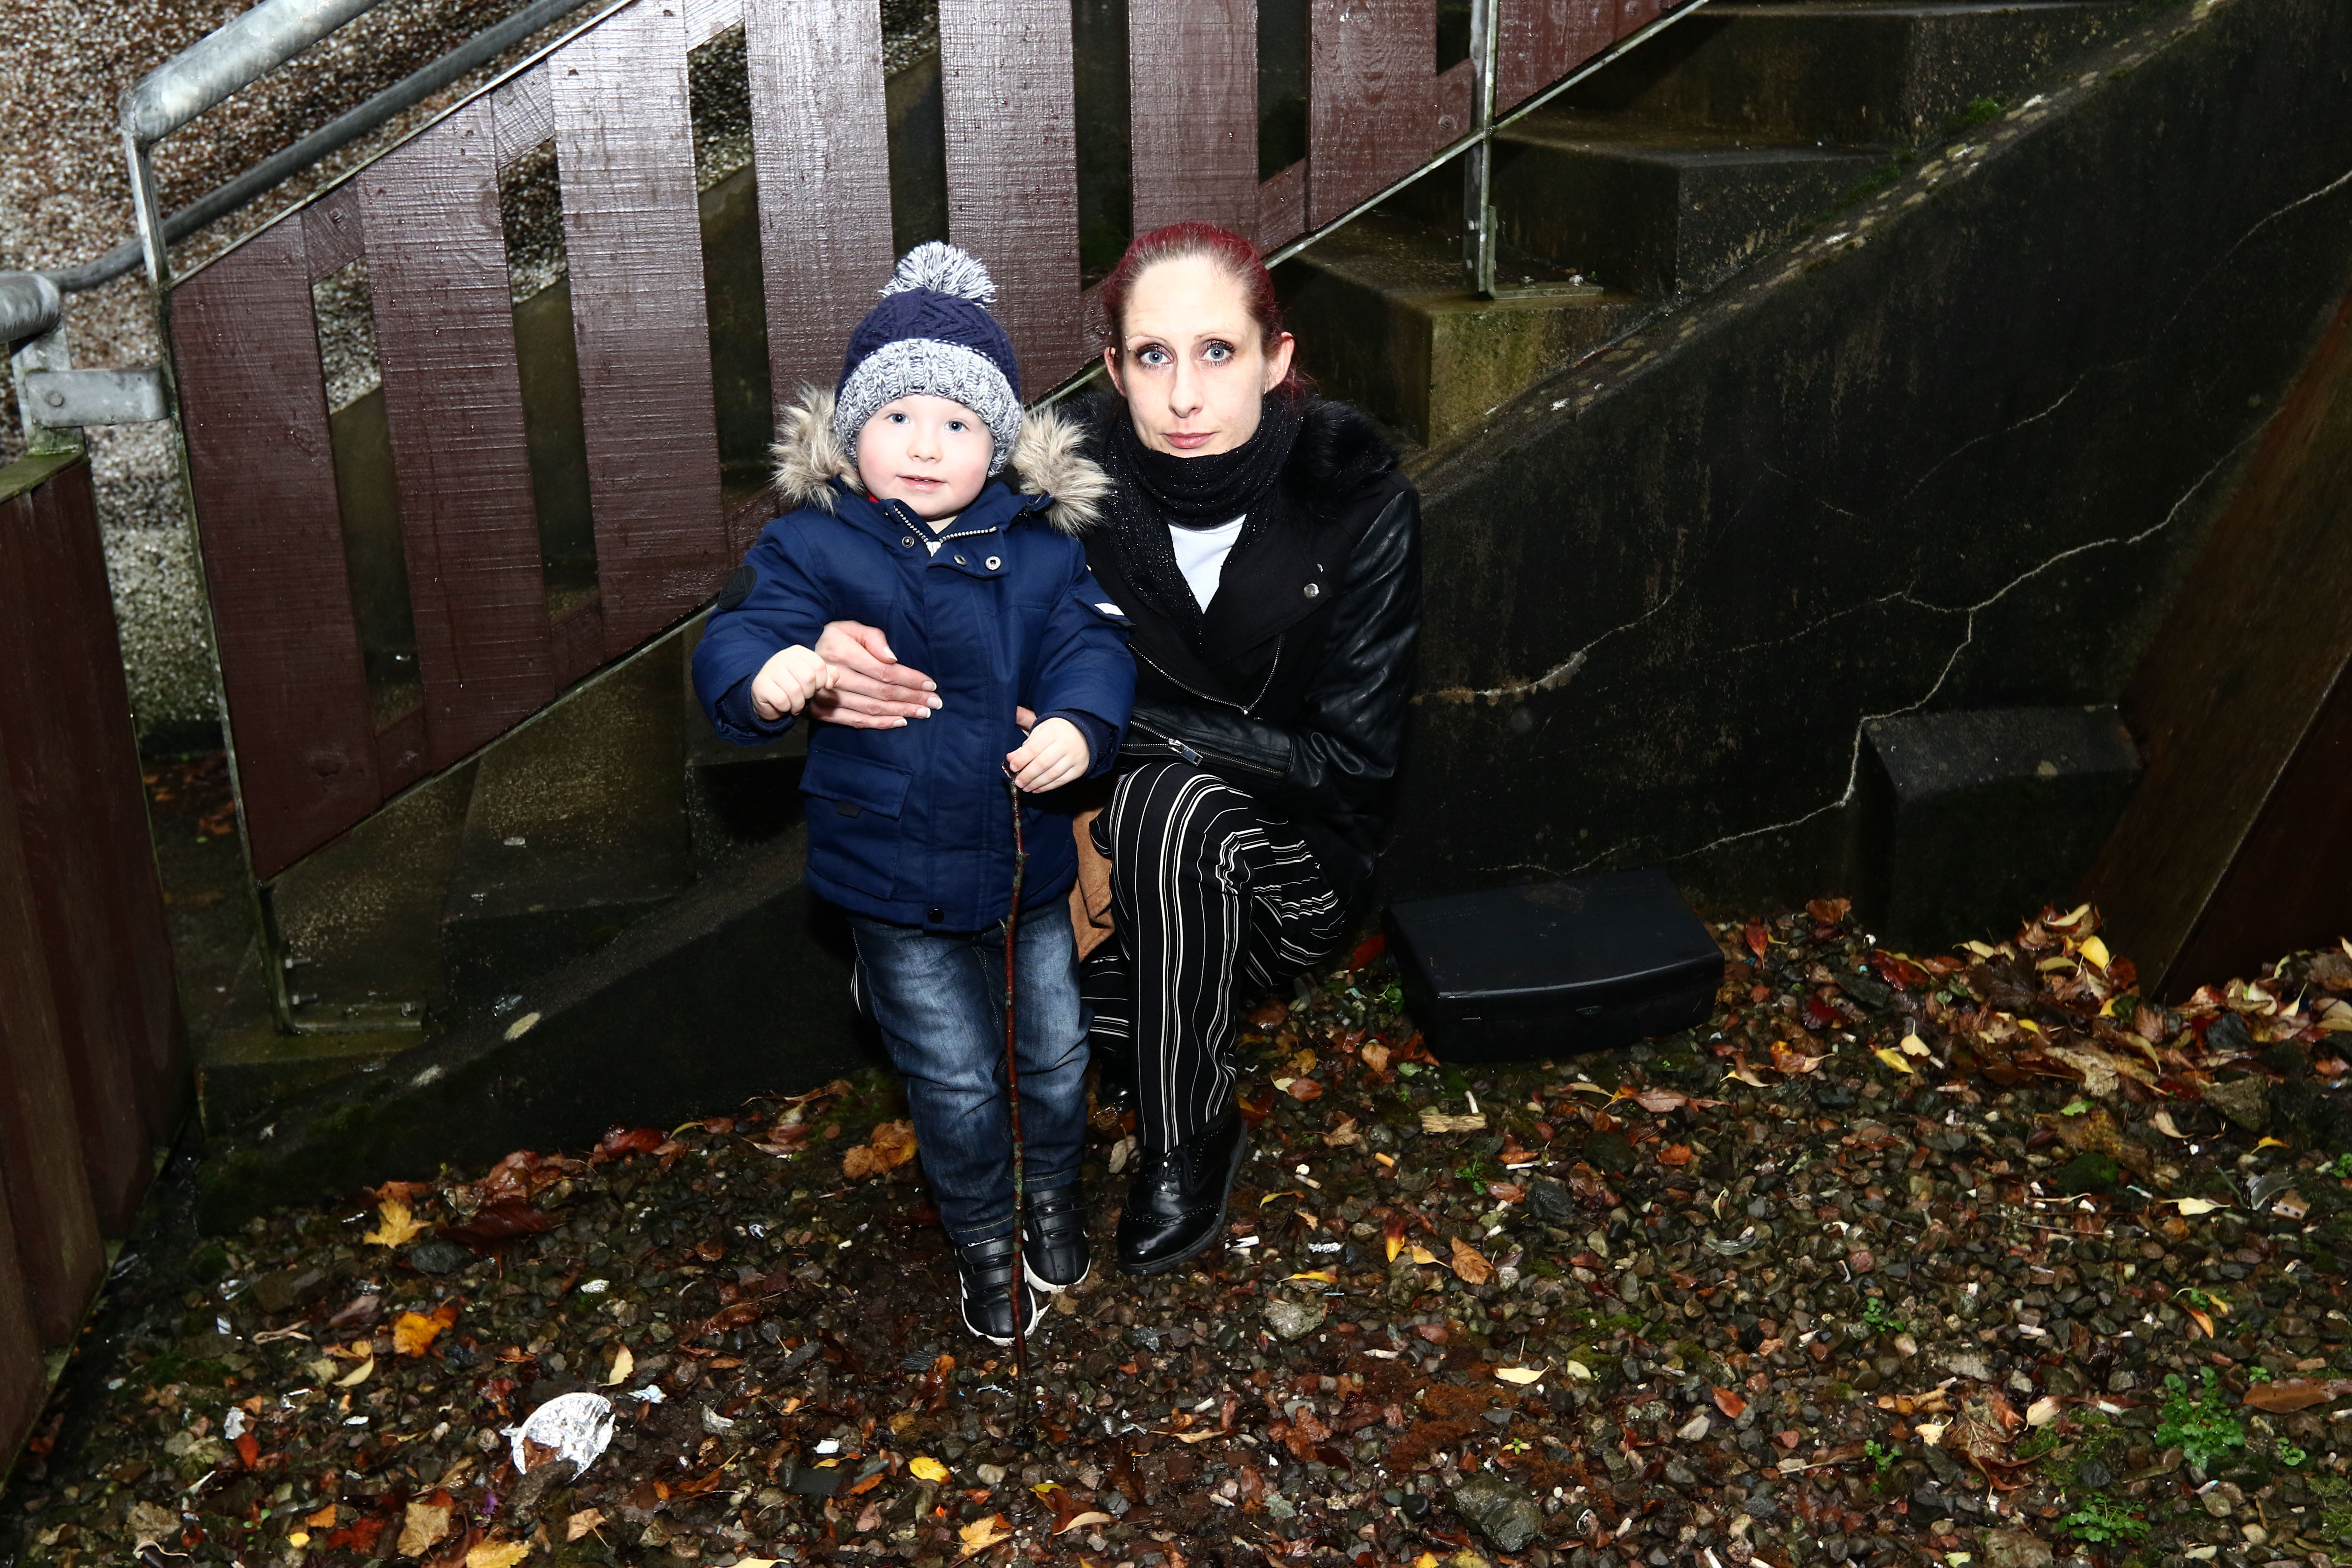 Alison McKnight and her son David Laird 2 near the rat traps at her home.